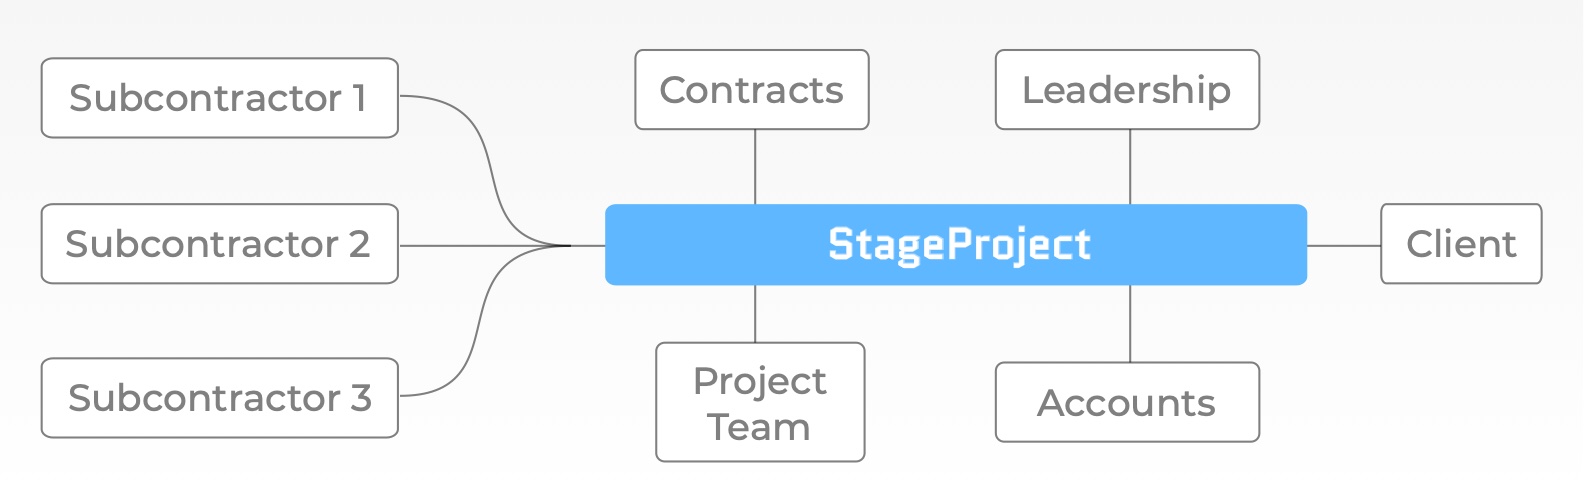 Contract Management with StageProject